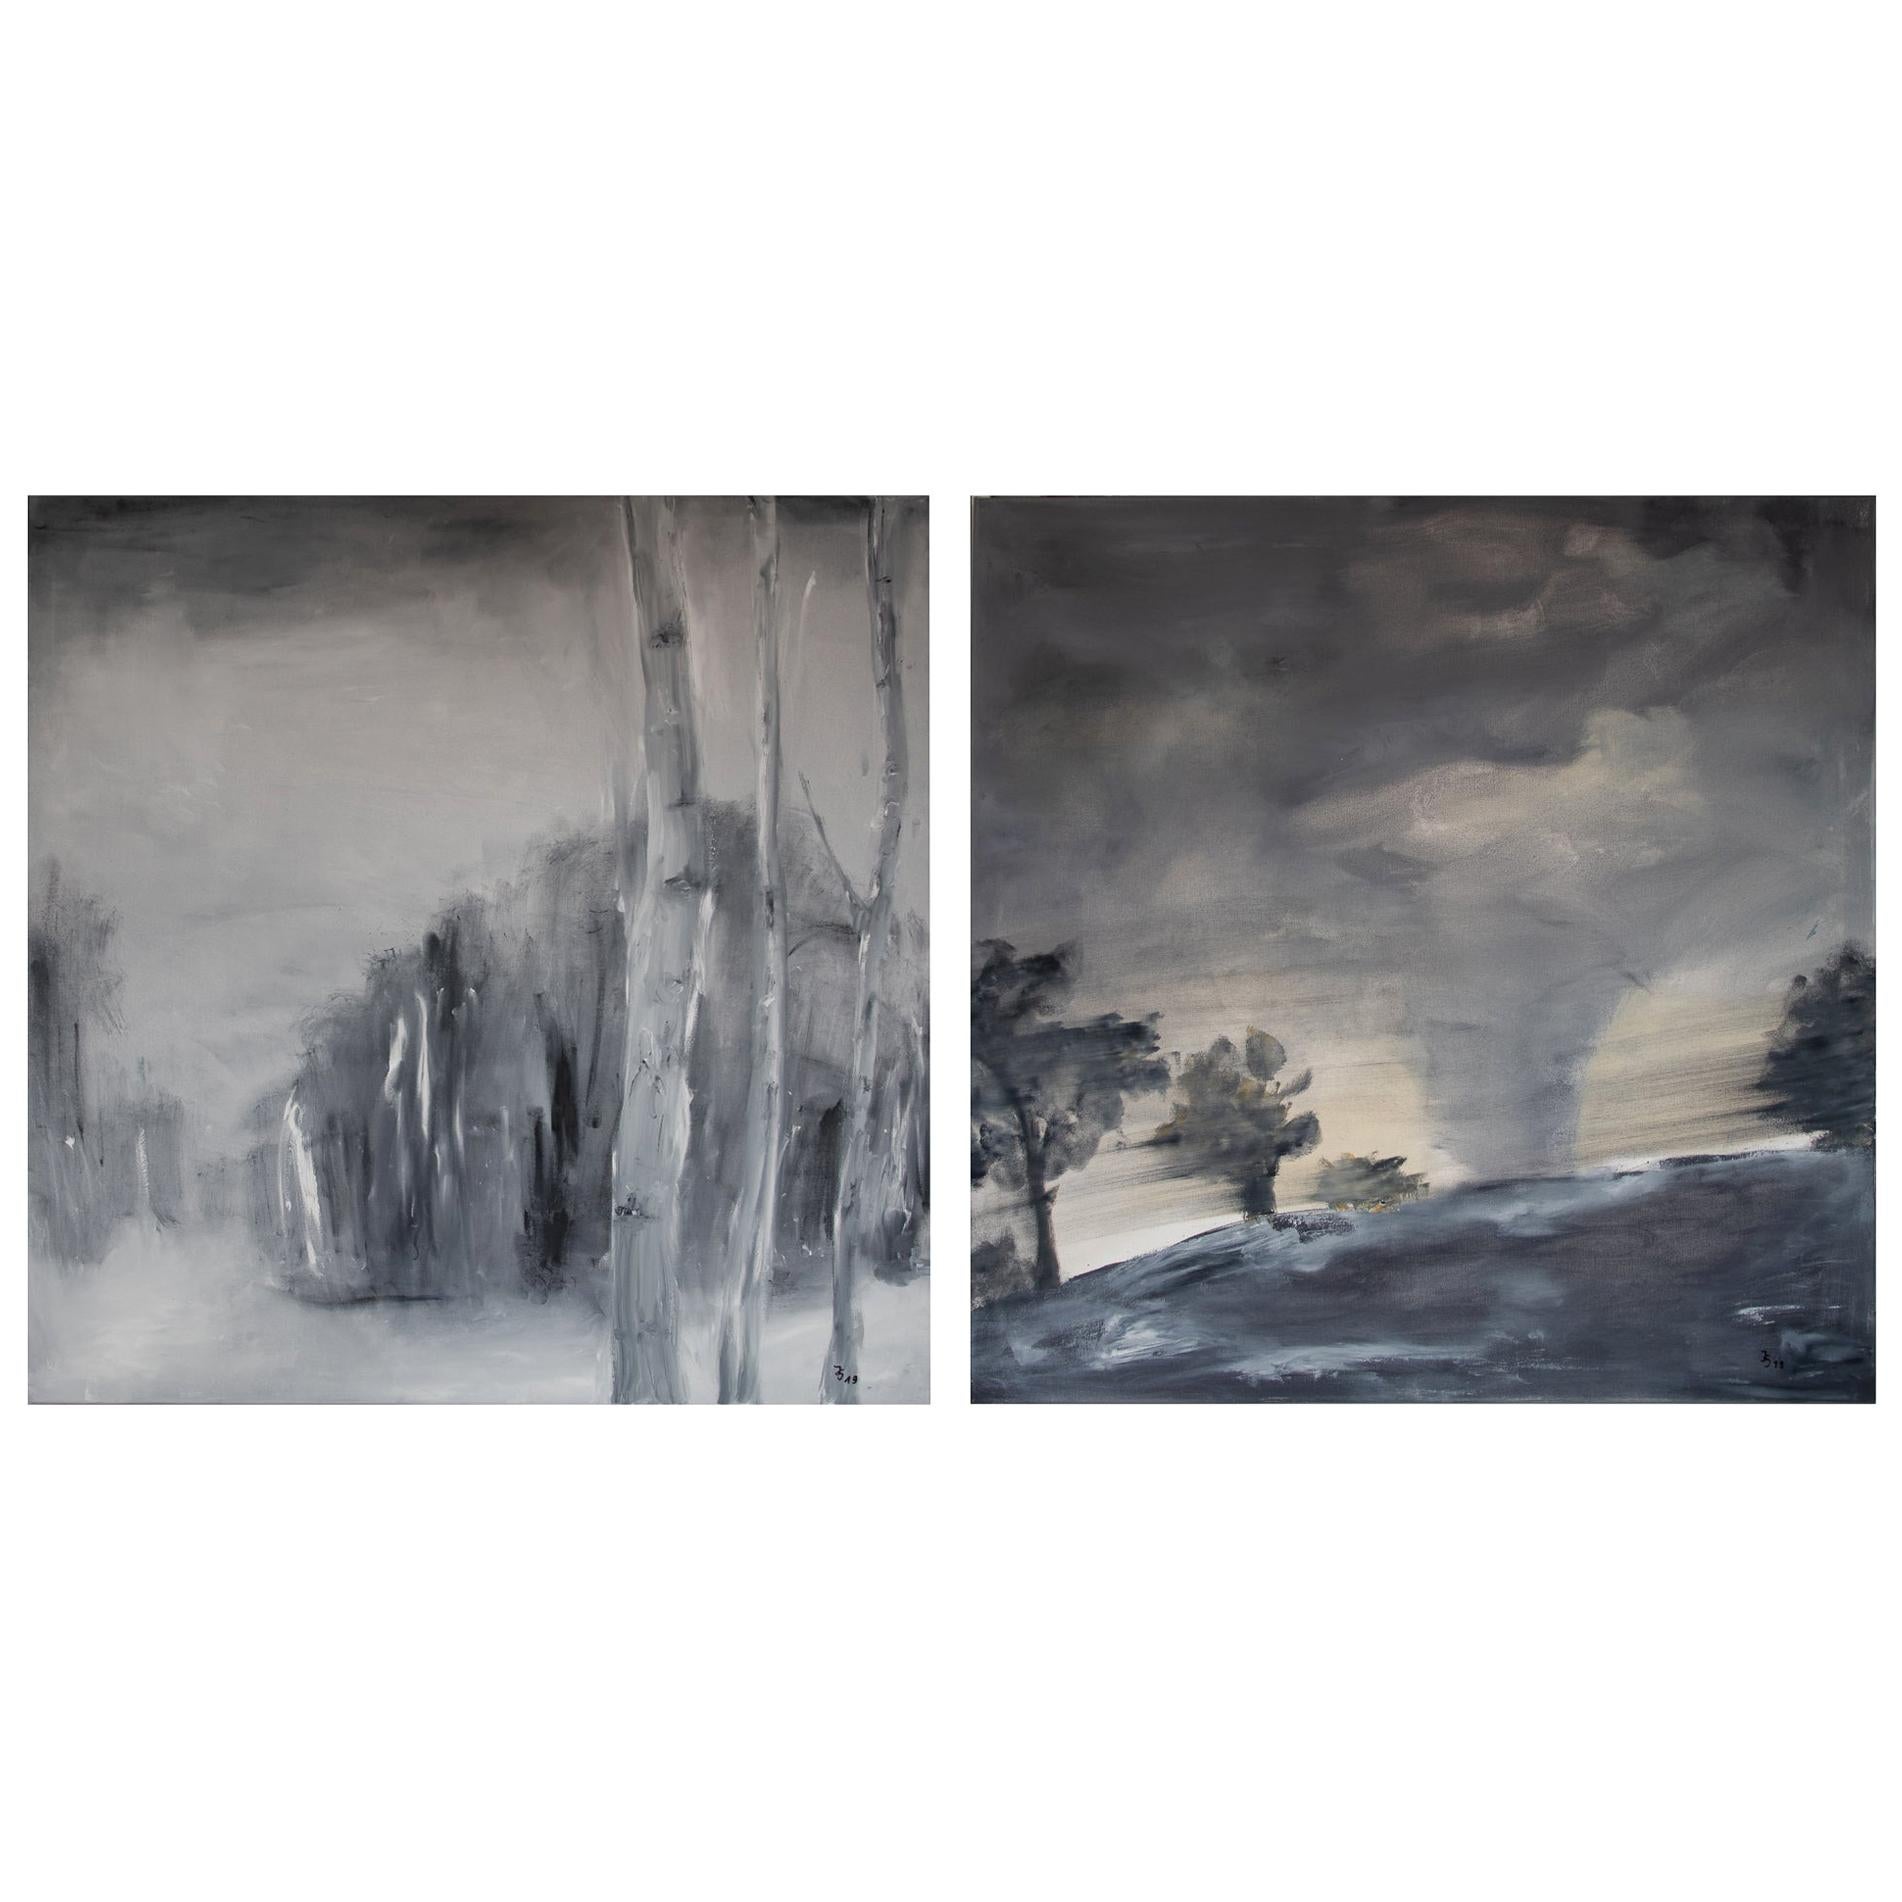 Set of Two Paintings by Ingrid Stolzenberg 'Landscape' German Post Expressionism For Sale